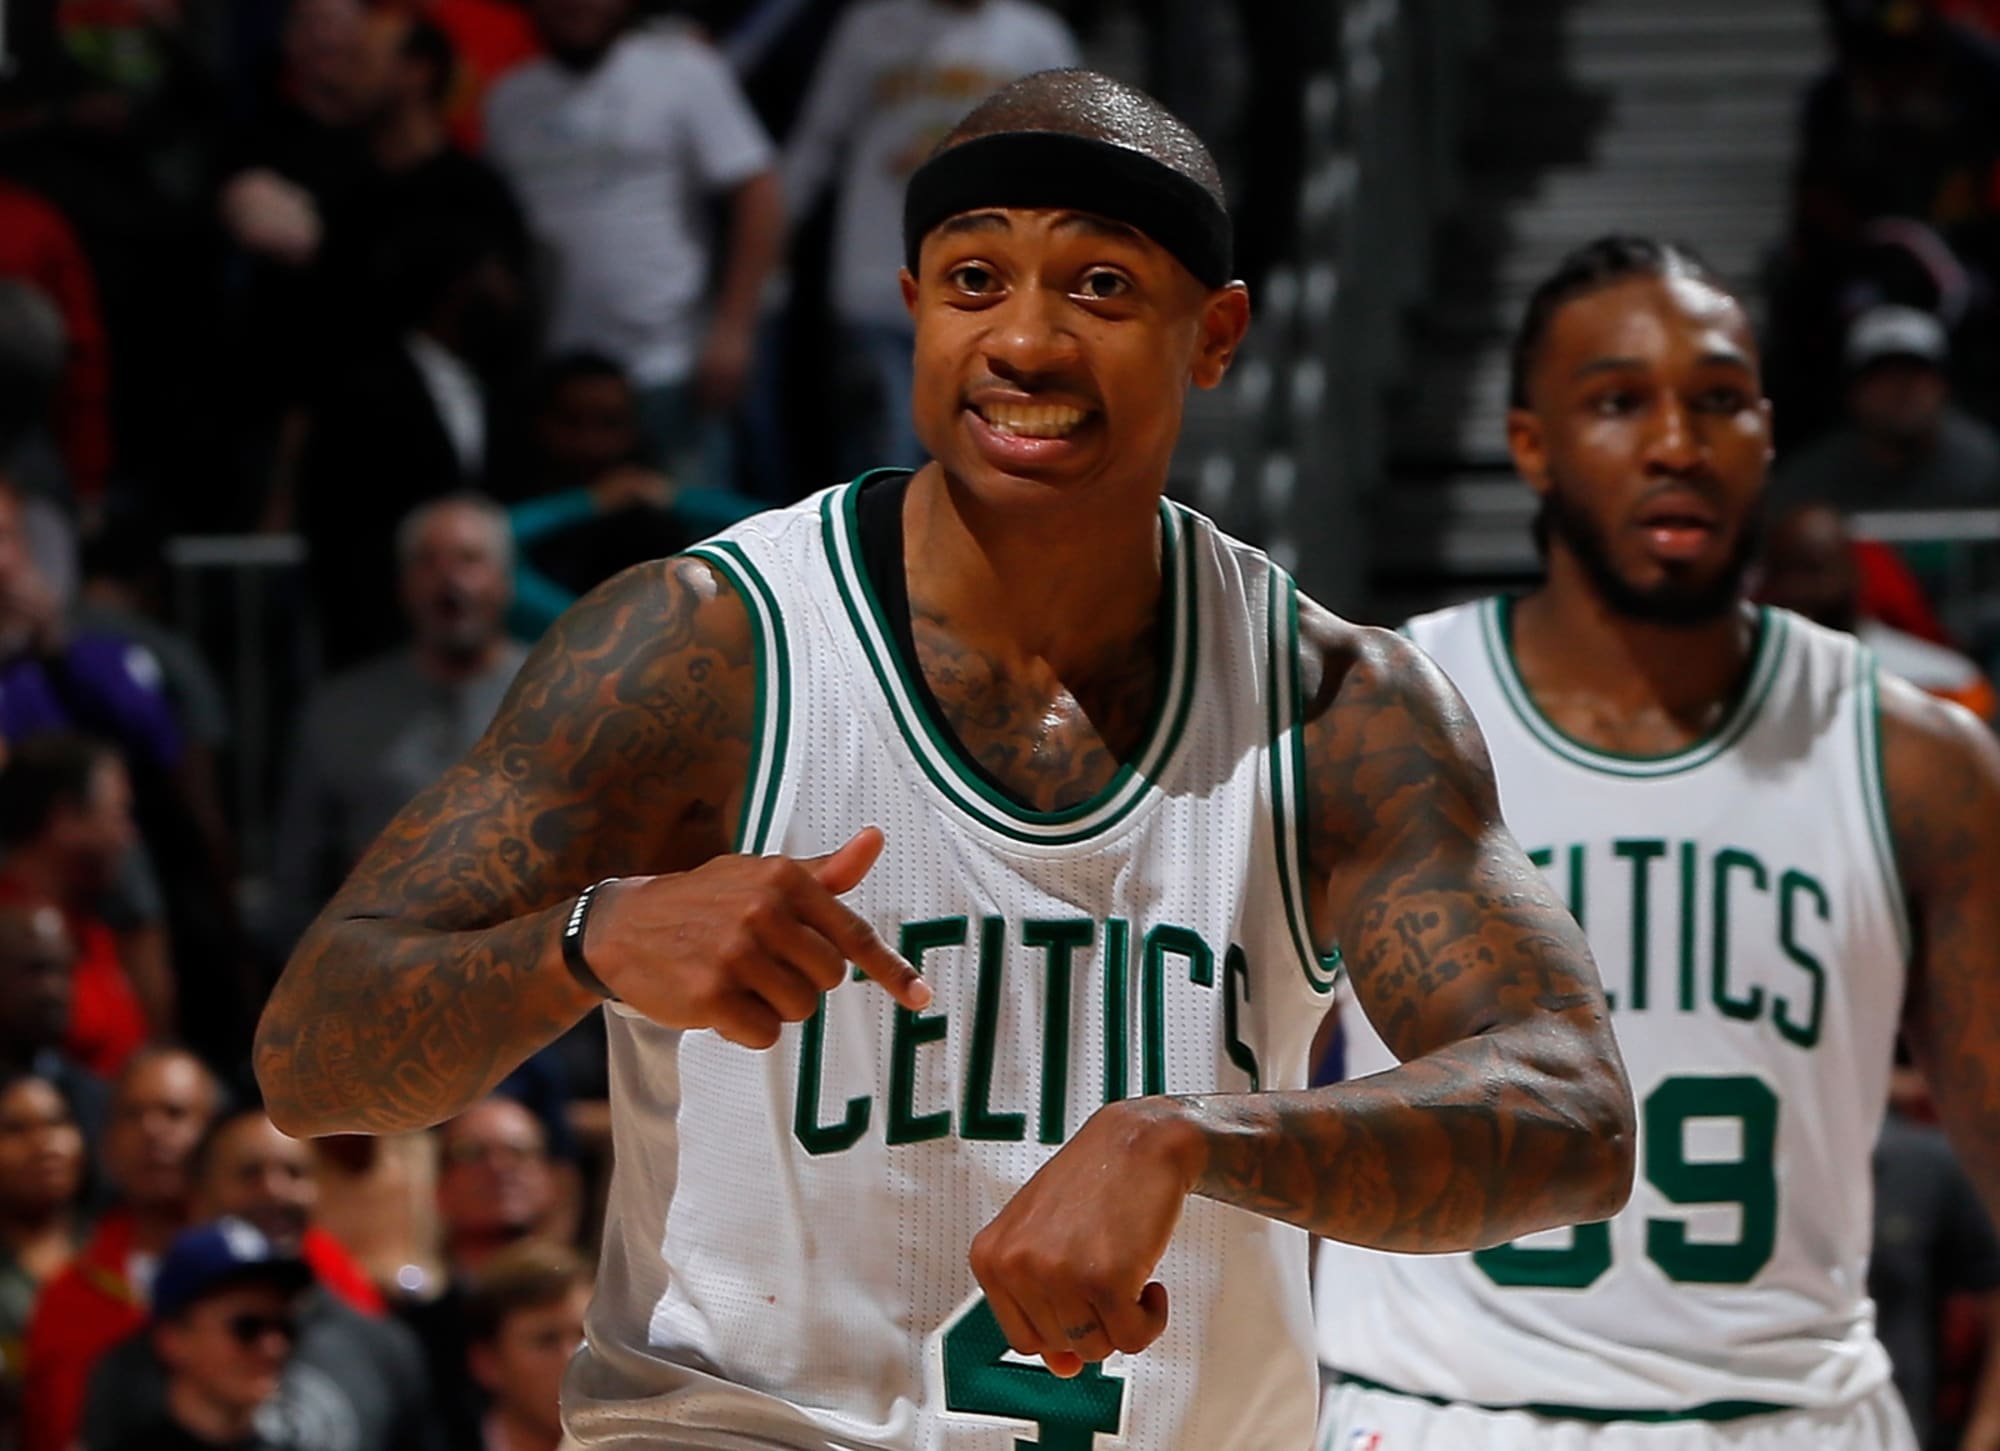 Celtics Get Another Giant Performance From Isaiah Thomas - CBS Boston